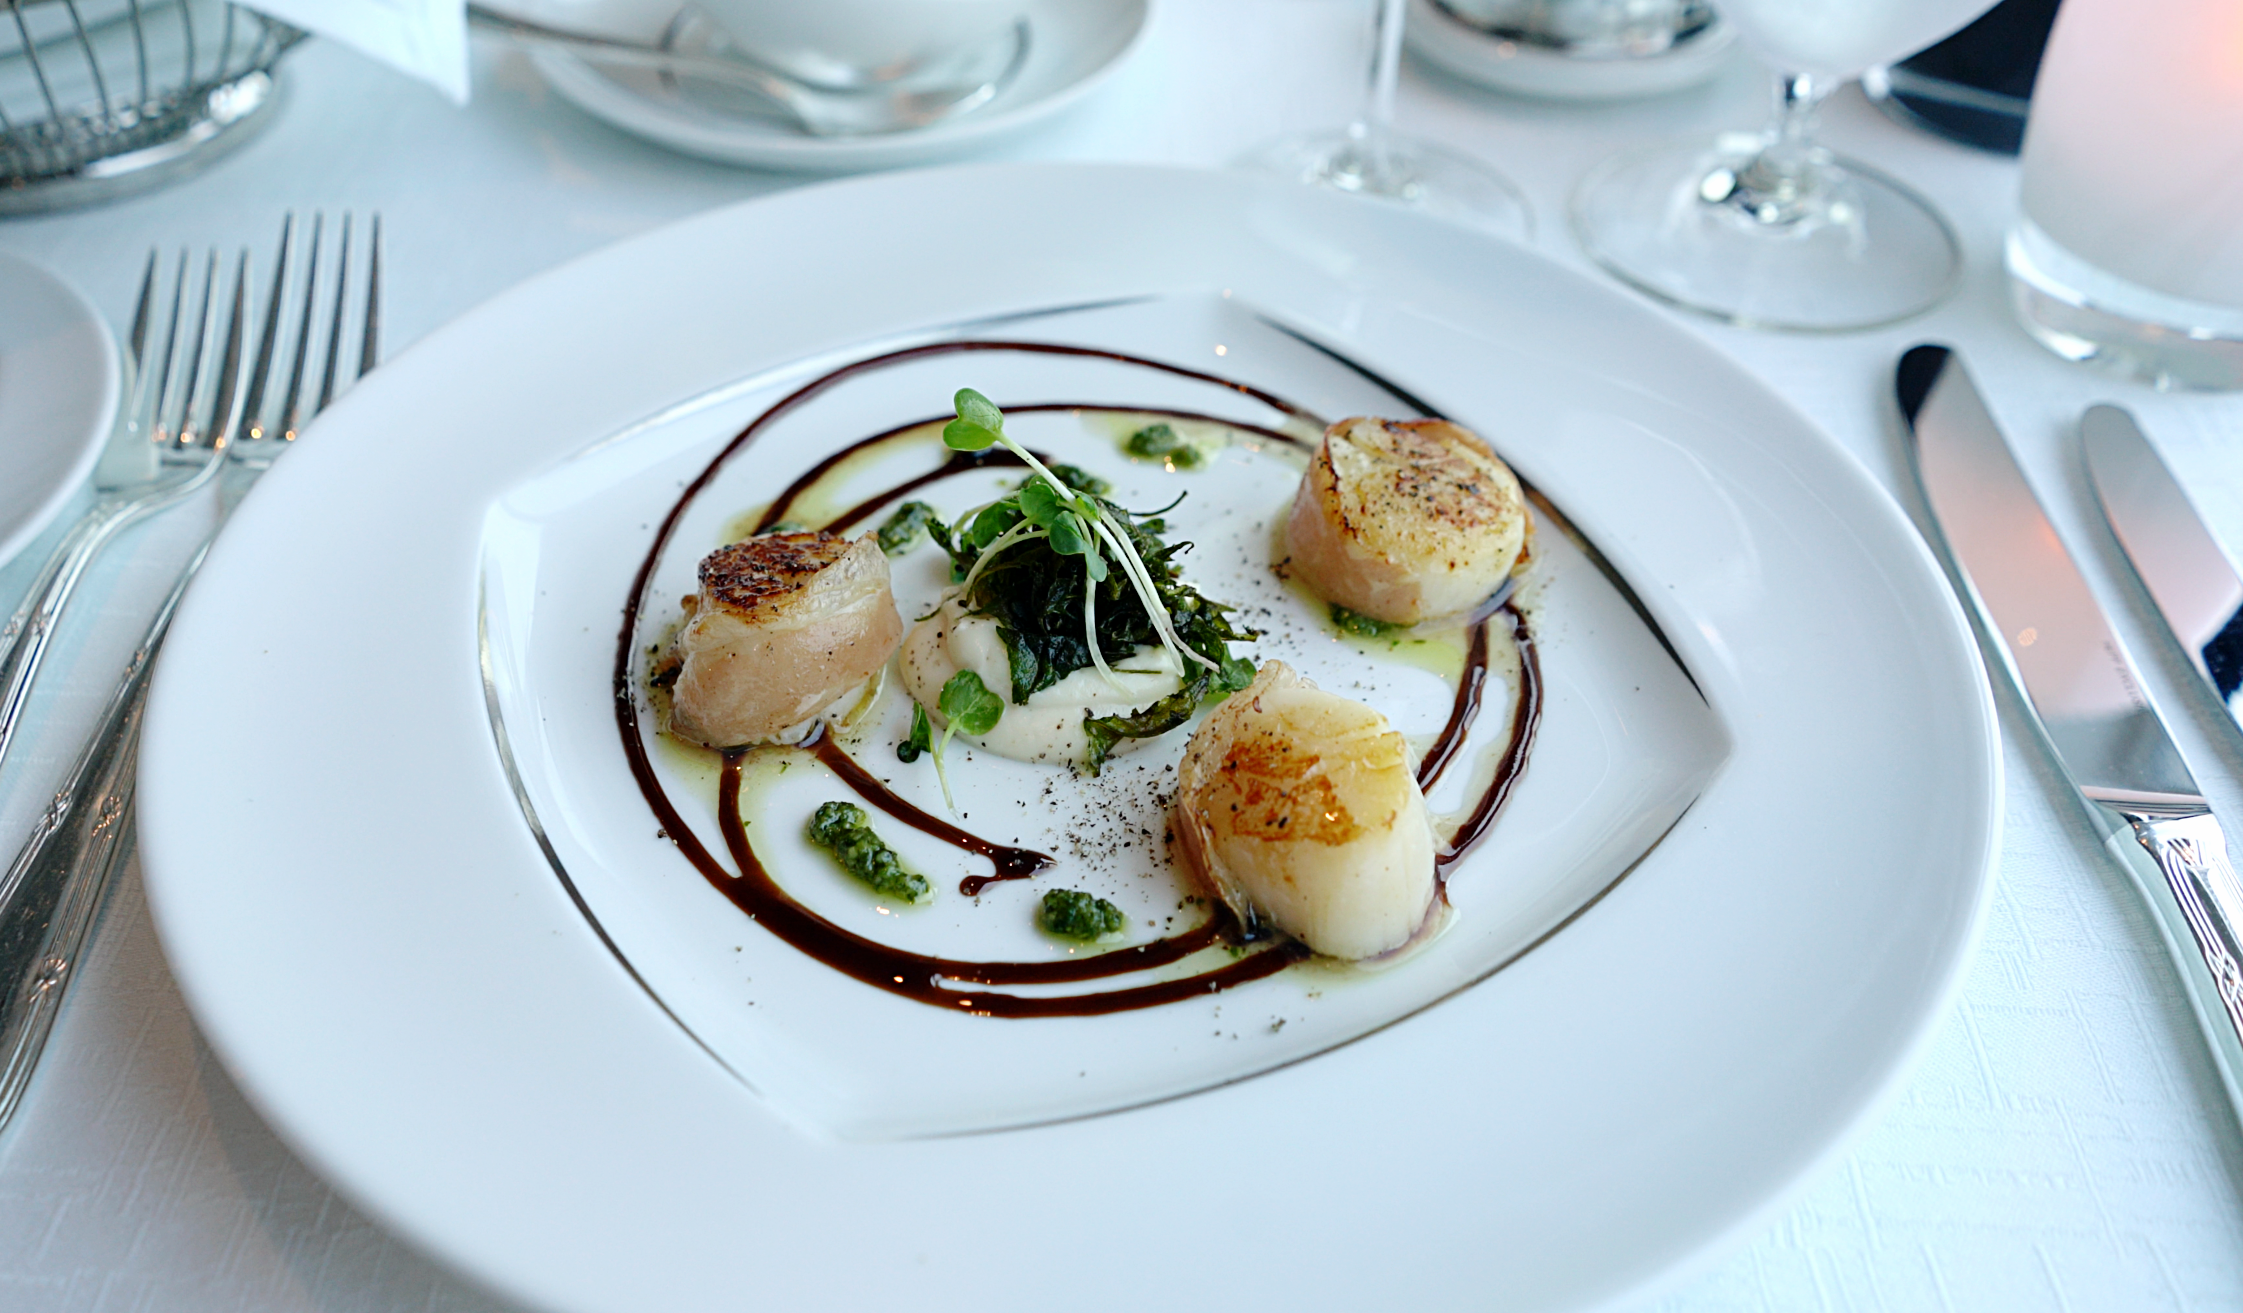  The scallop starter in the Aqualina restaurant.  